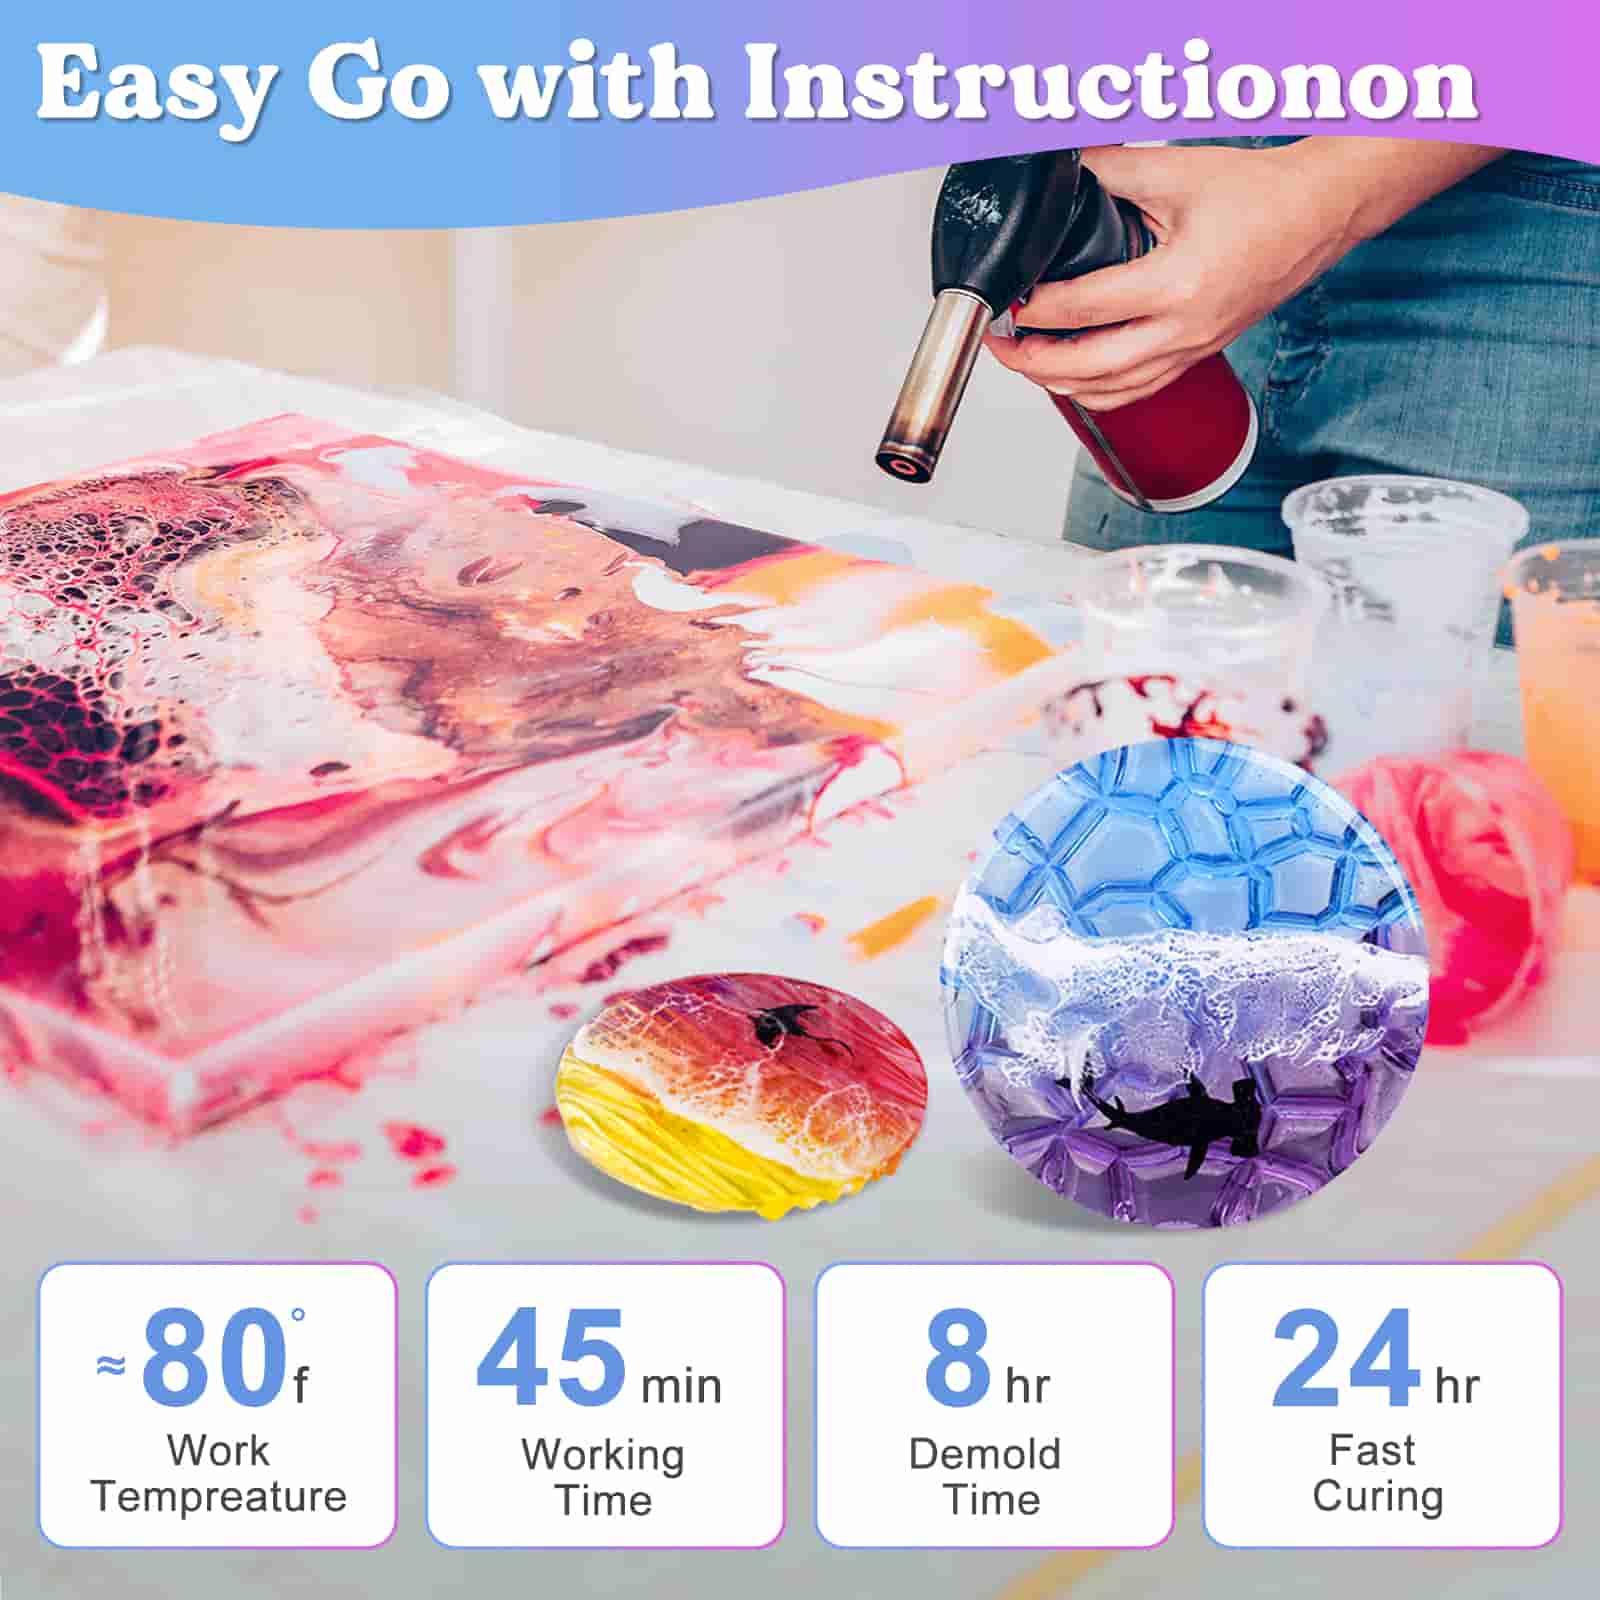 1 Gallon Epoxy Resin Kit with Pumps, Resin Dye, and Mica Powder